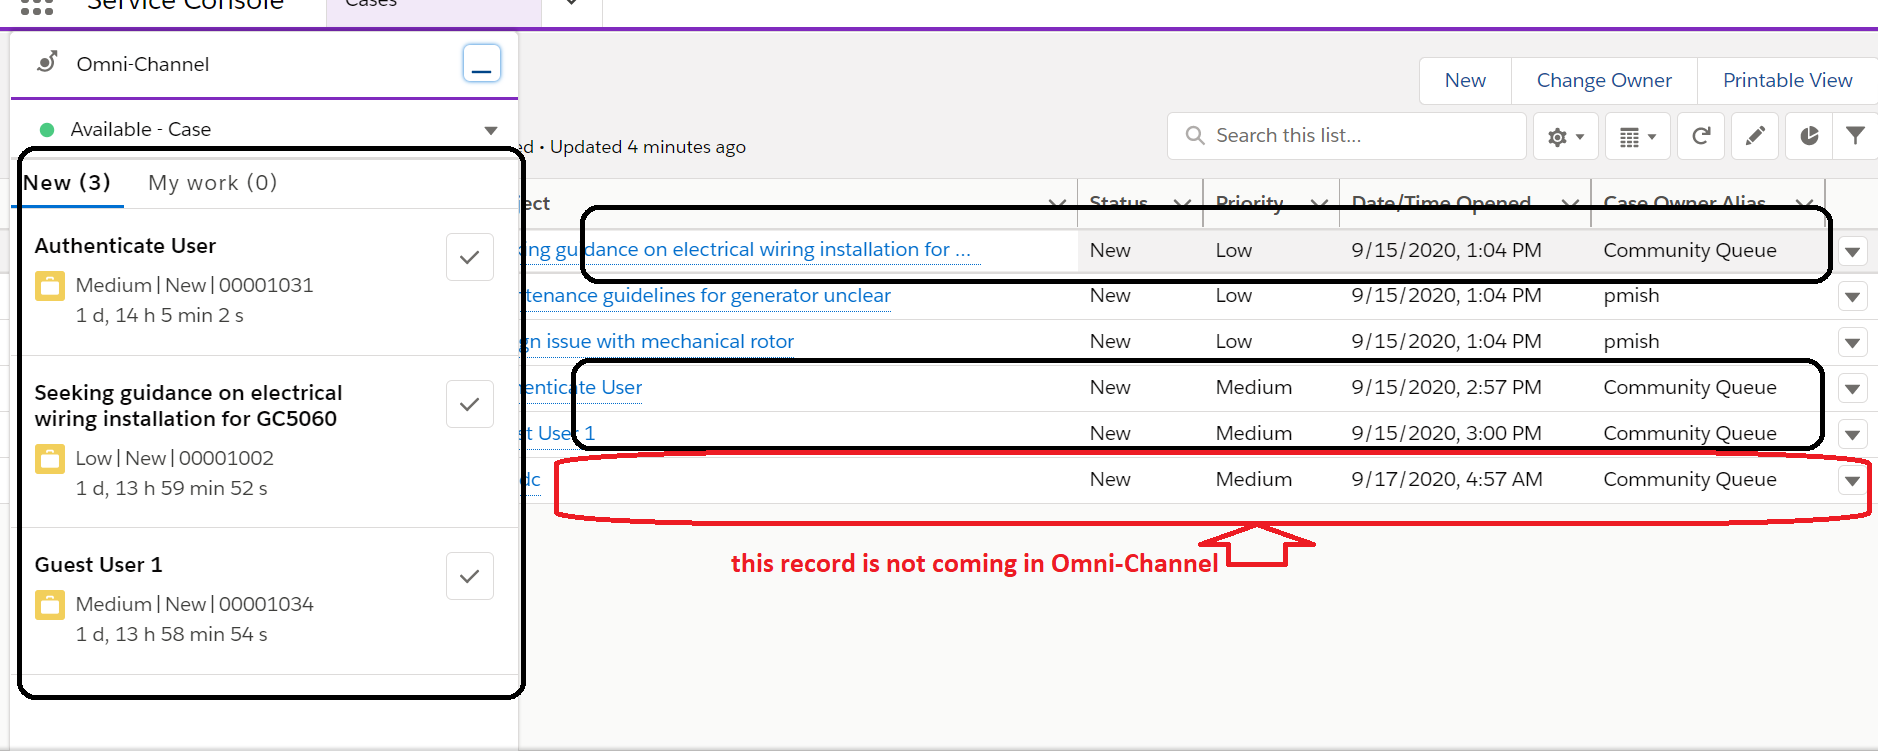 Omni-Channel not showing Case record created from Community